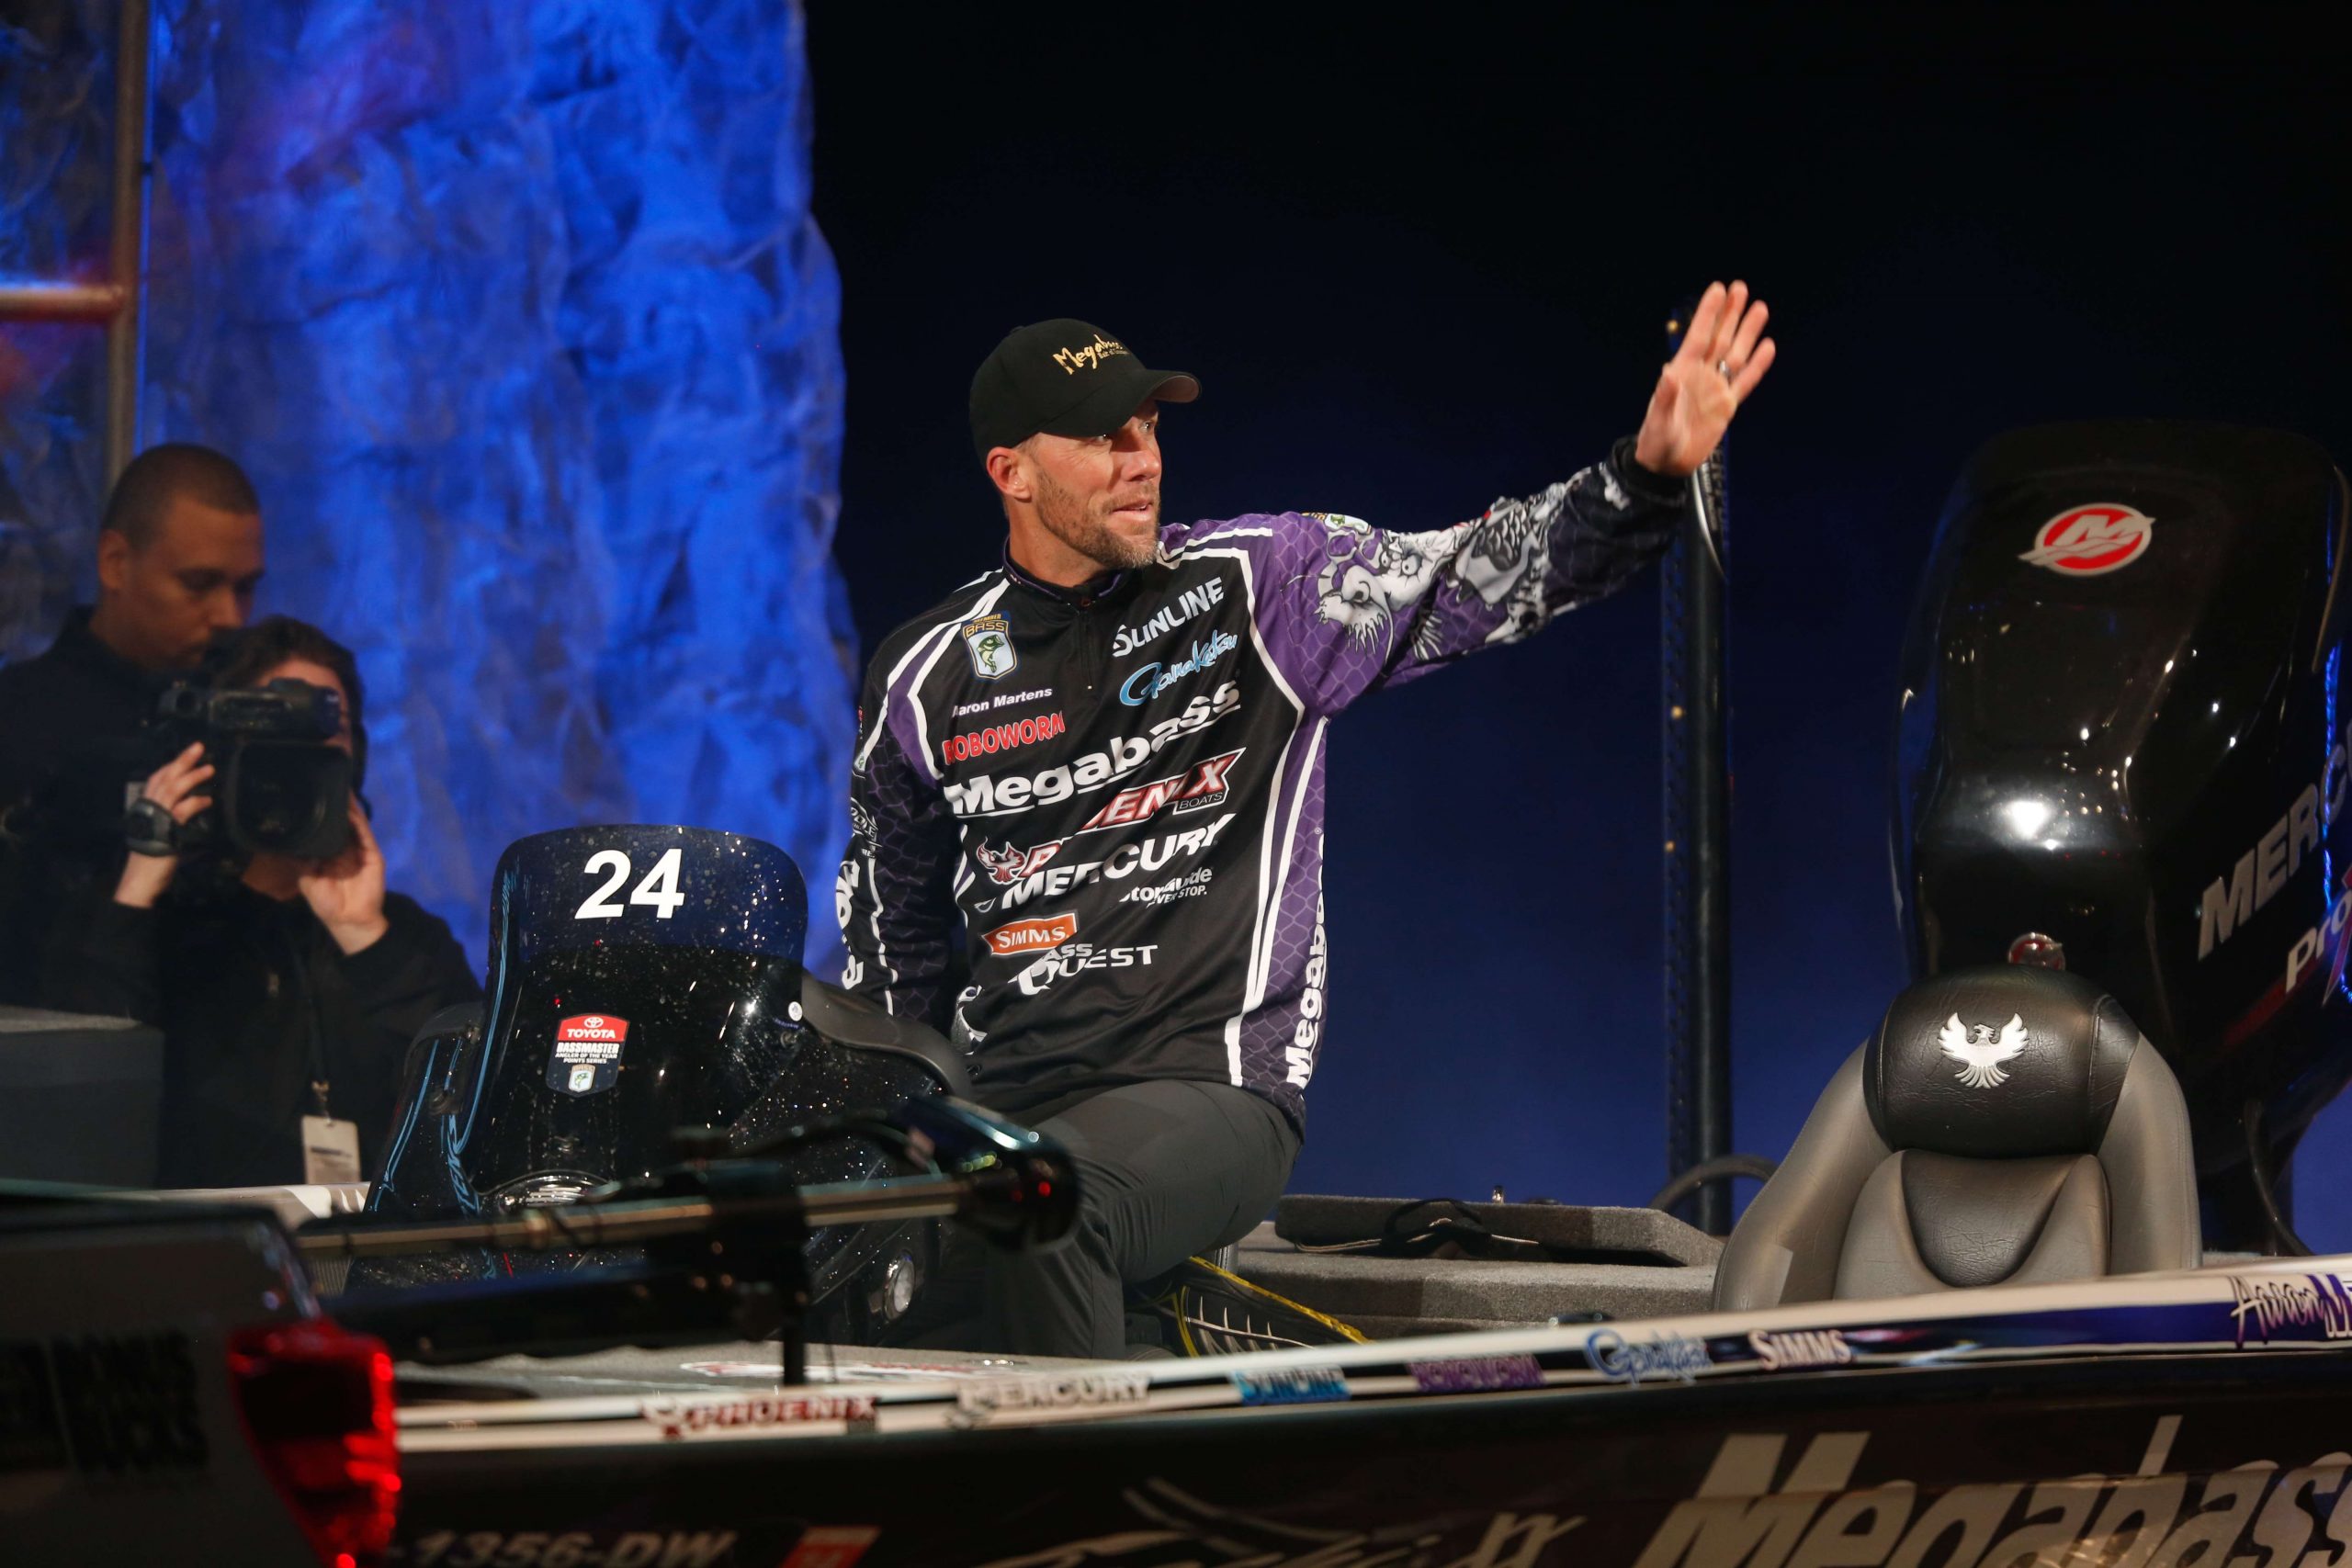 <h4>Aaron Martens</h4><BR>
Aaron Martens is a three-time winner of Toyota Bassmaster Angler of the Year (2005, 2013, 2015). The native Californian has 19 appearances in the Bassmaster Classic, nine B.A.S.S. wins and over $3 million in earnings. He is widely respected for his dropshotting skills, although Martensâ three AOY titles attest to his reputation as a highly versatile angler. 
